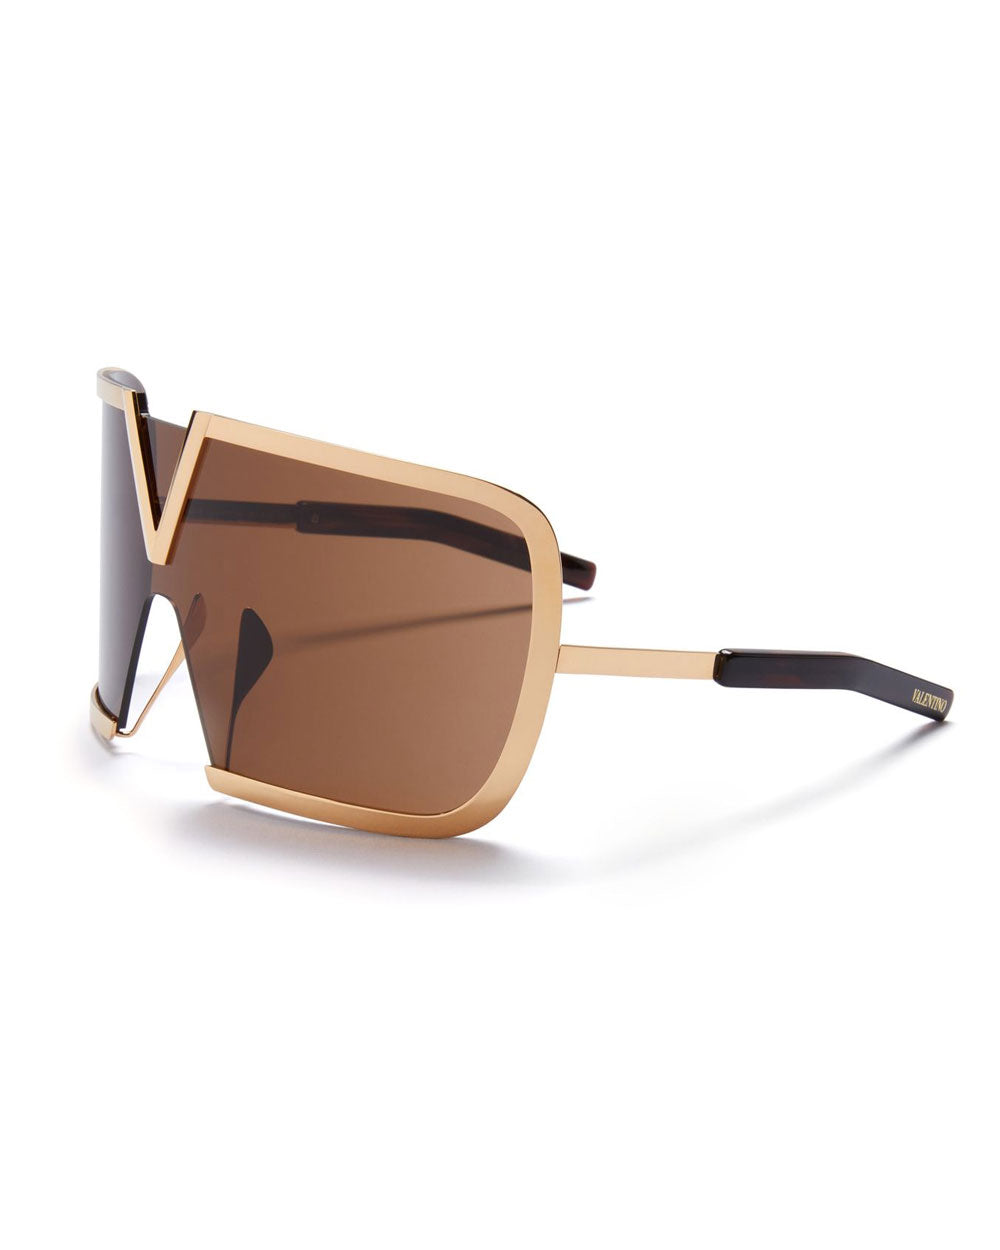 Romask Sunglasses in Brown